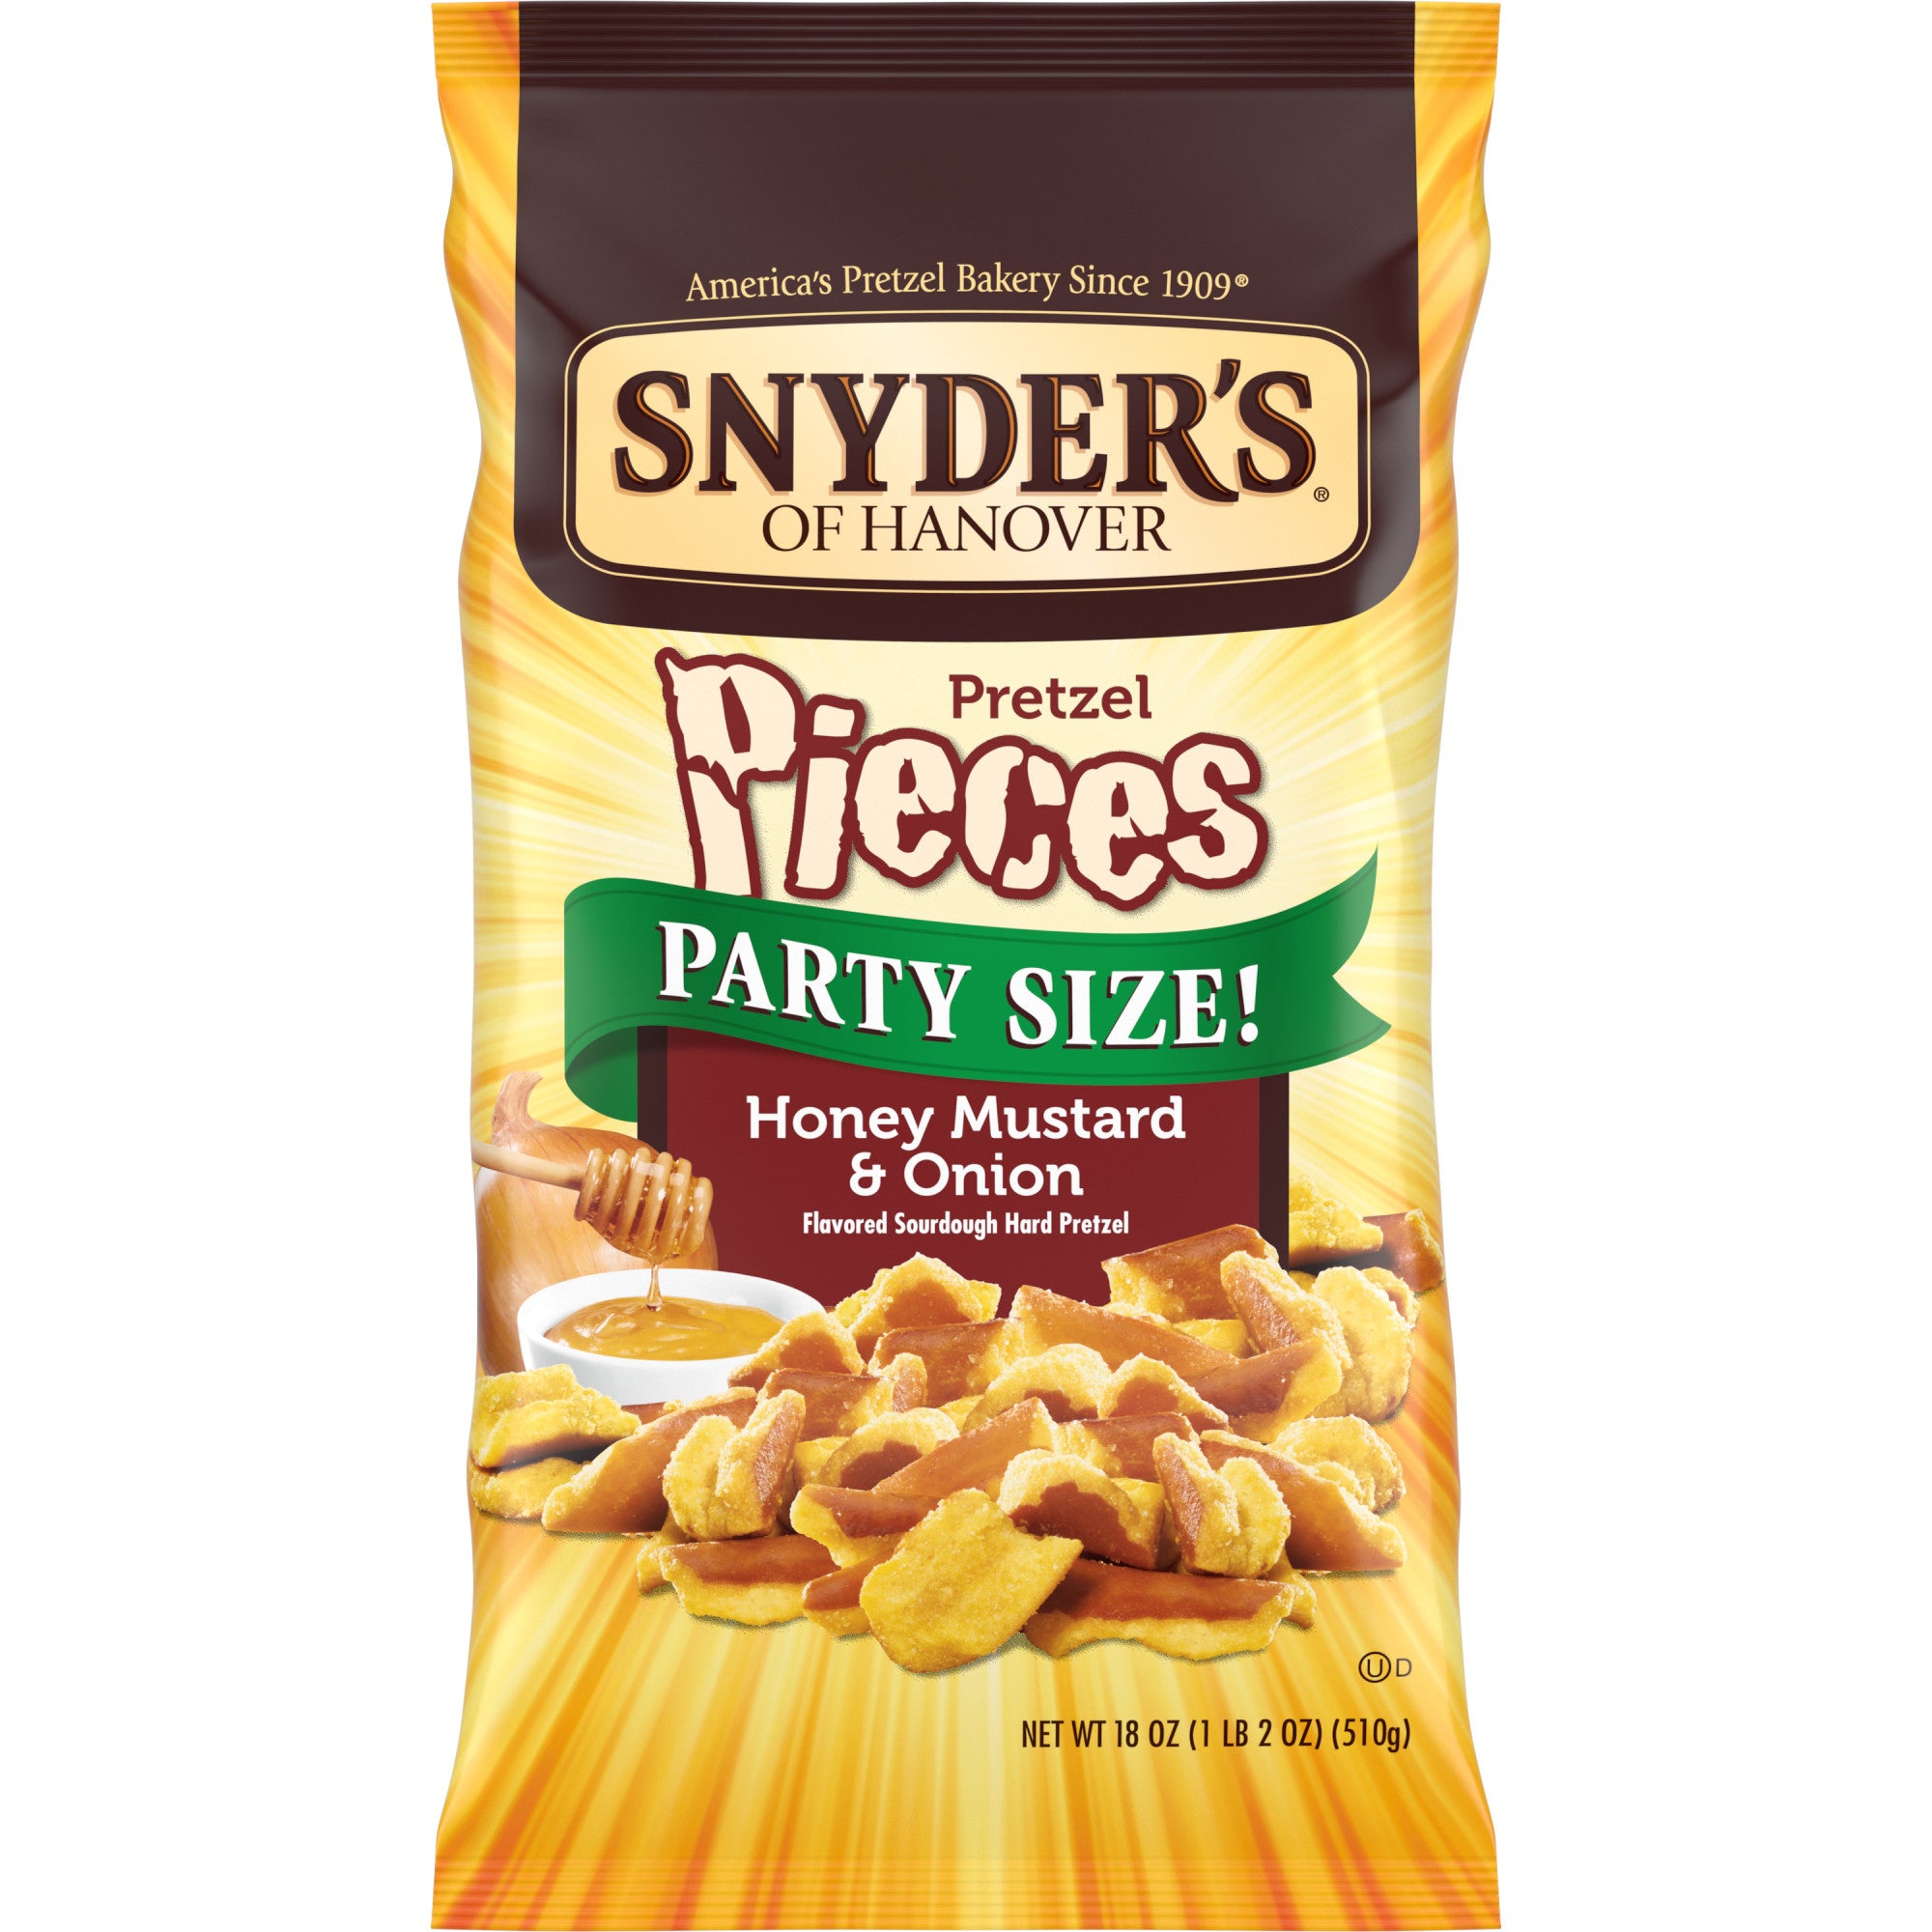 Snyder's of Hanover Pretzel Pieces, Honey Mustard & Onion, Party Size